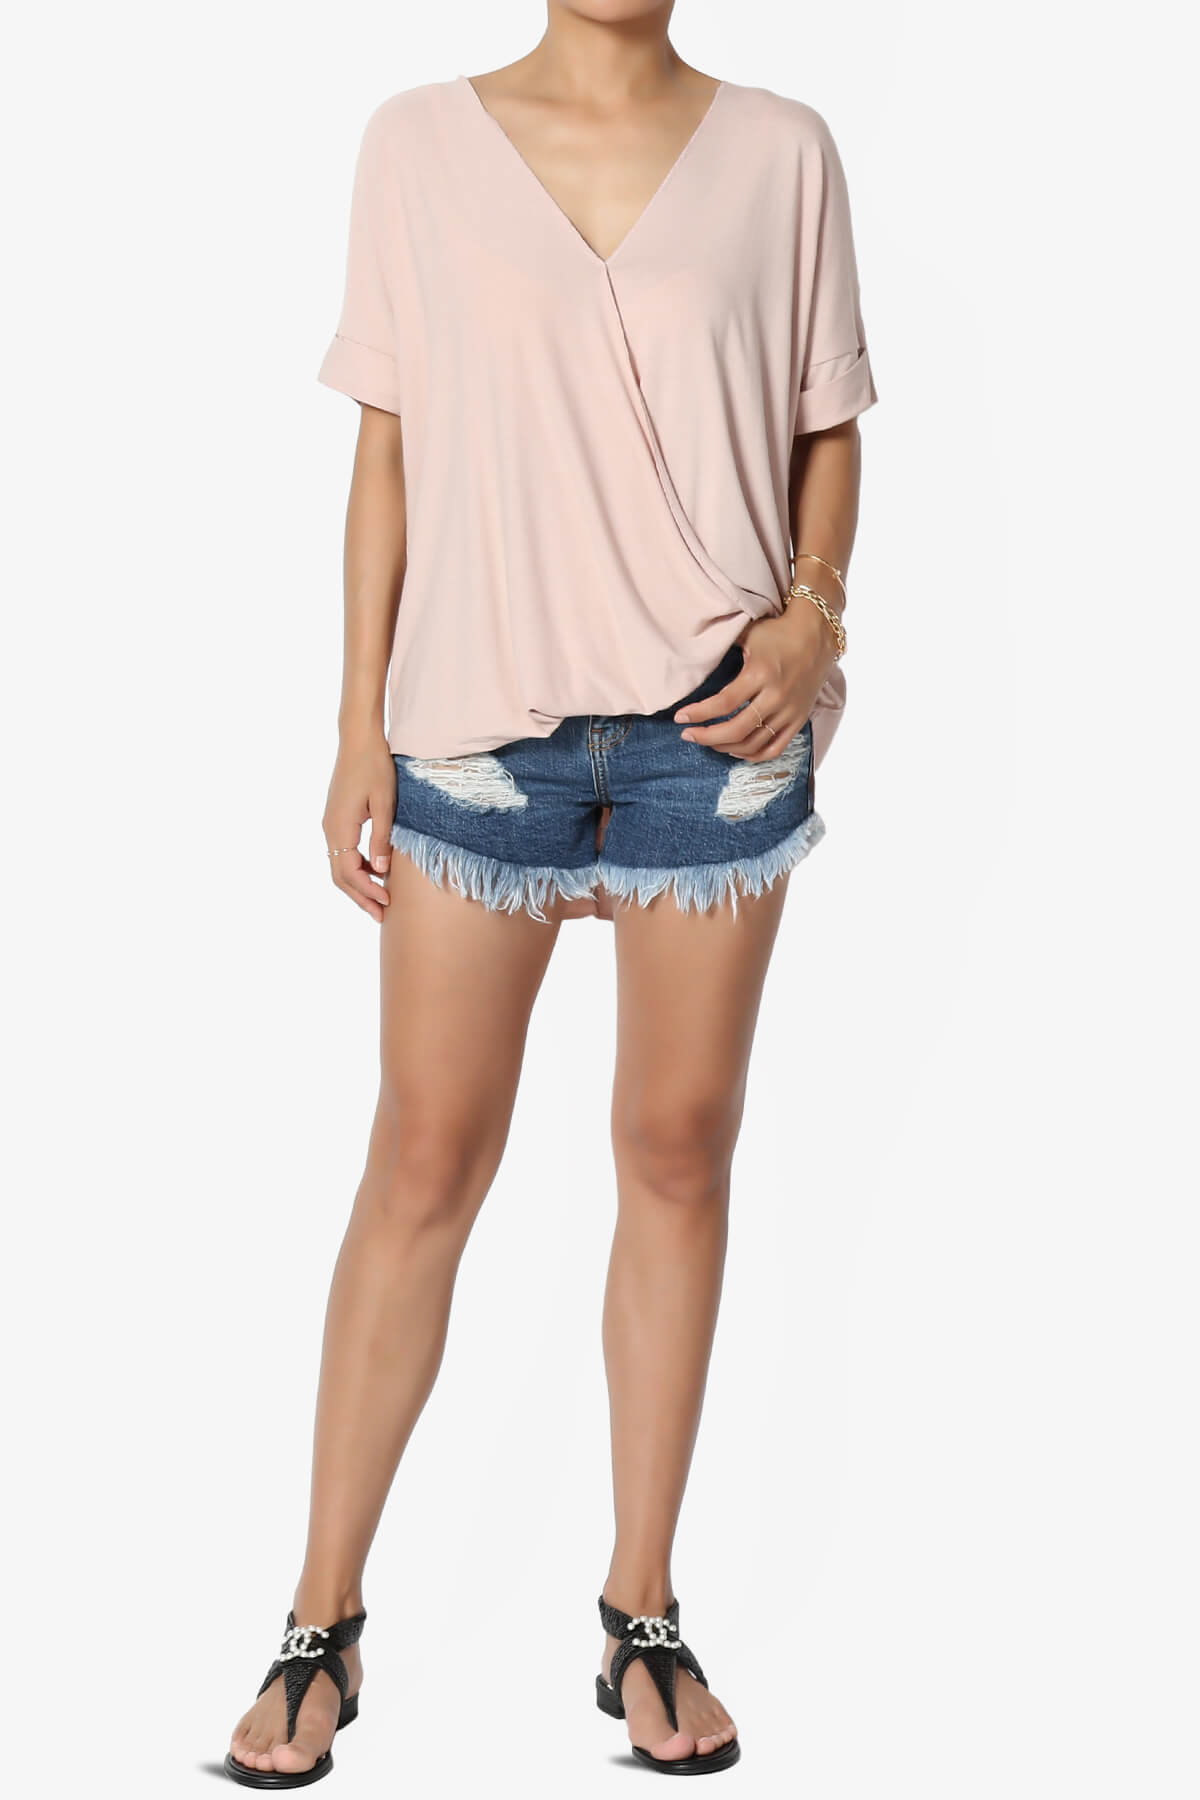 Load image into Gallery viewer, Tackle Wrap Hi-Low Crepe Knit Top DUSTY BLUSH_6
